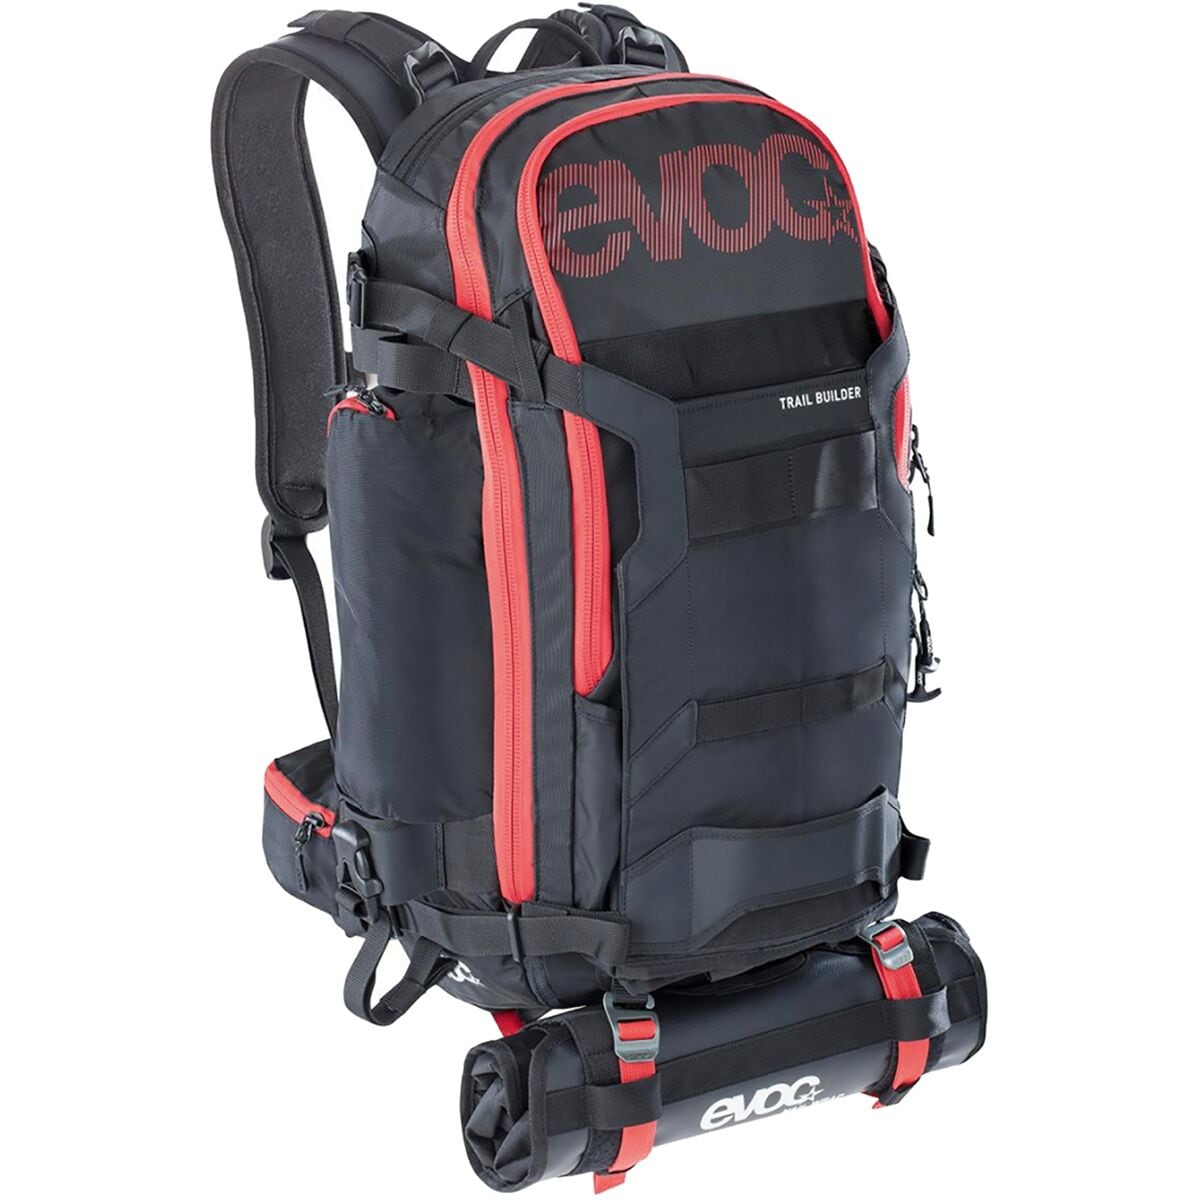 Evoc Trail Builder Technical Performance 30L Hydration Backpack